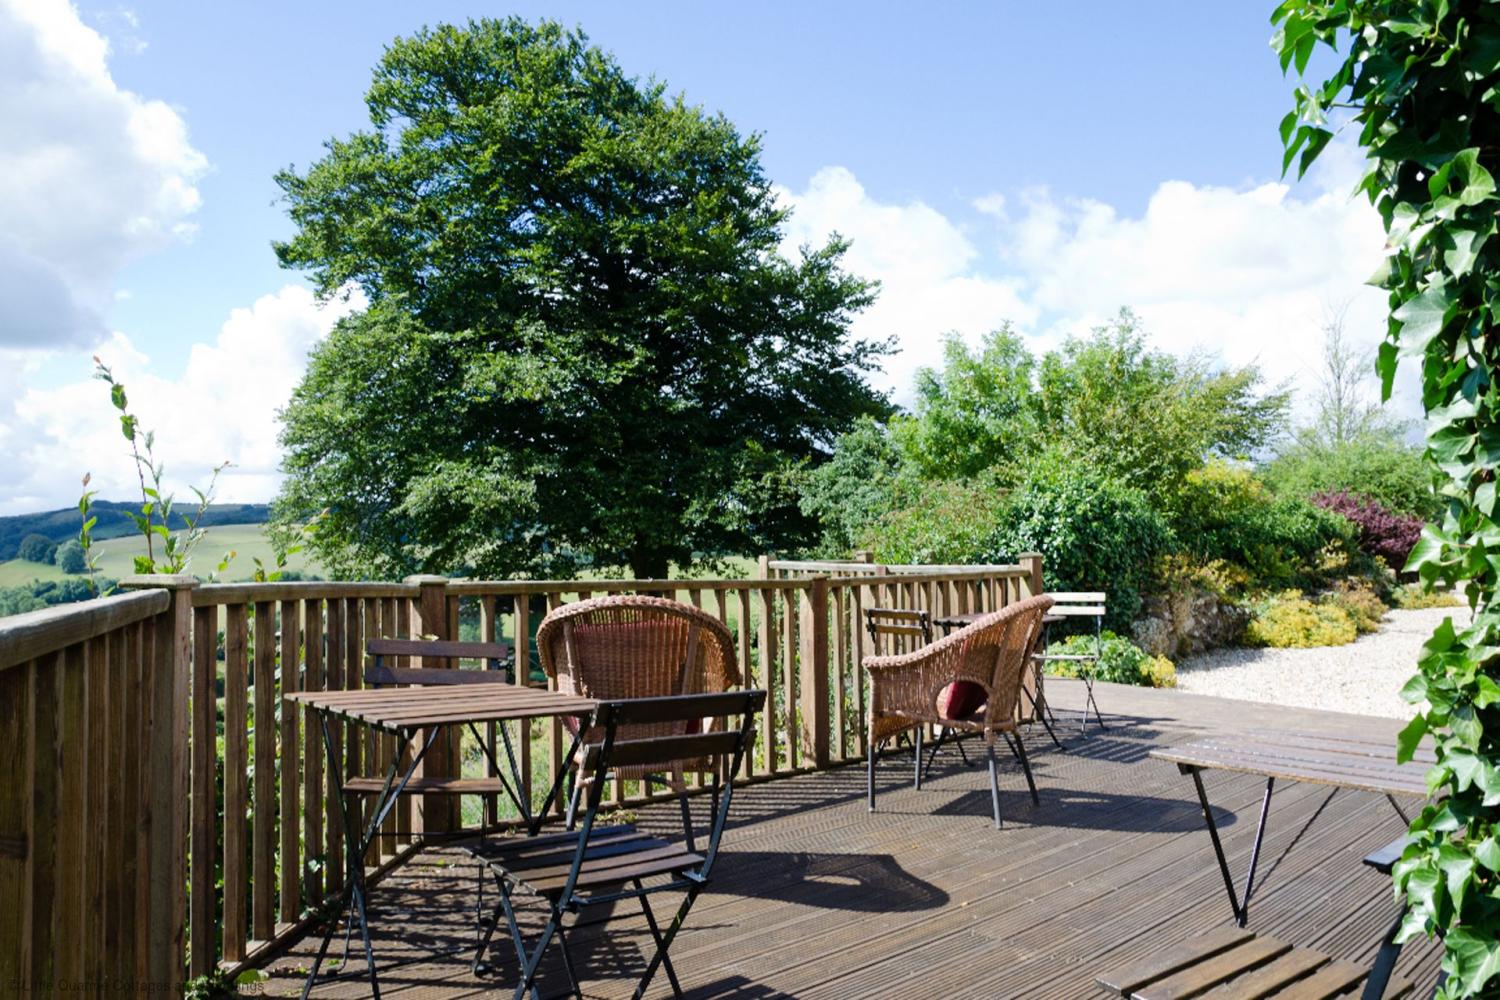 The decking wraps around the barn and is the perfect spot for a cup of tea